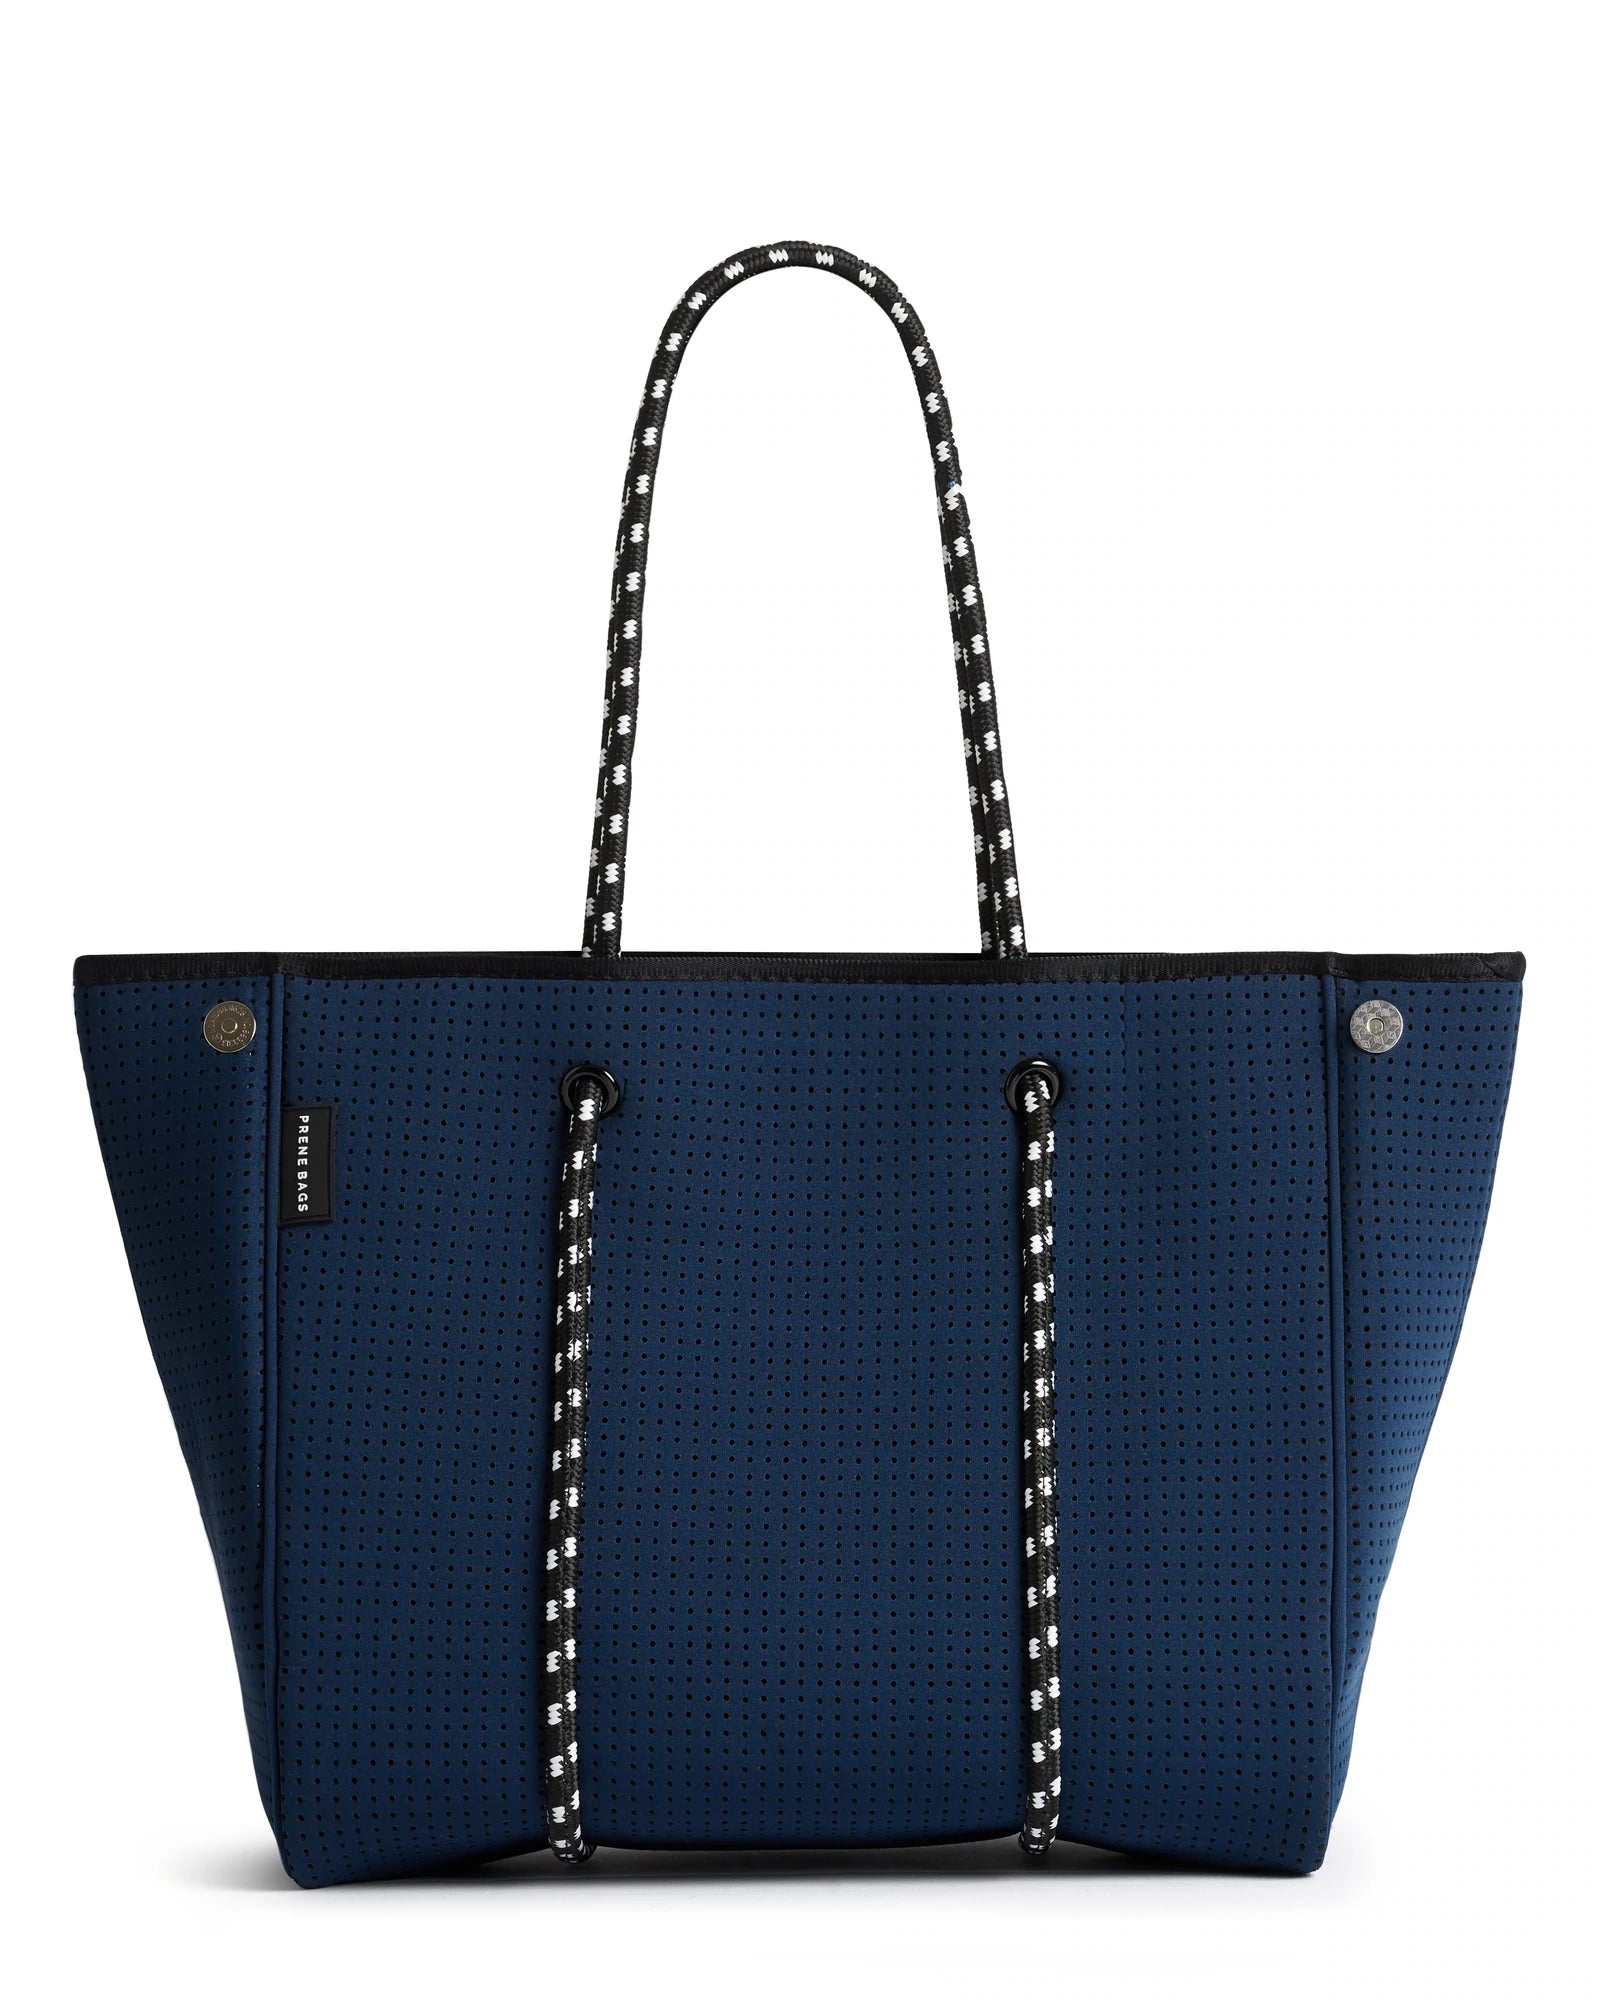 The sorrento bag - navy blue - ACCESSORIES